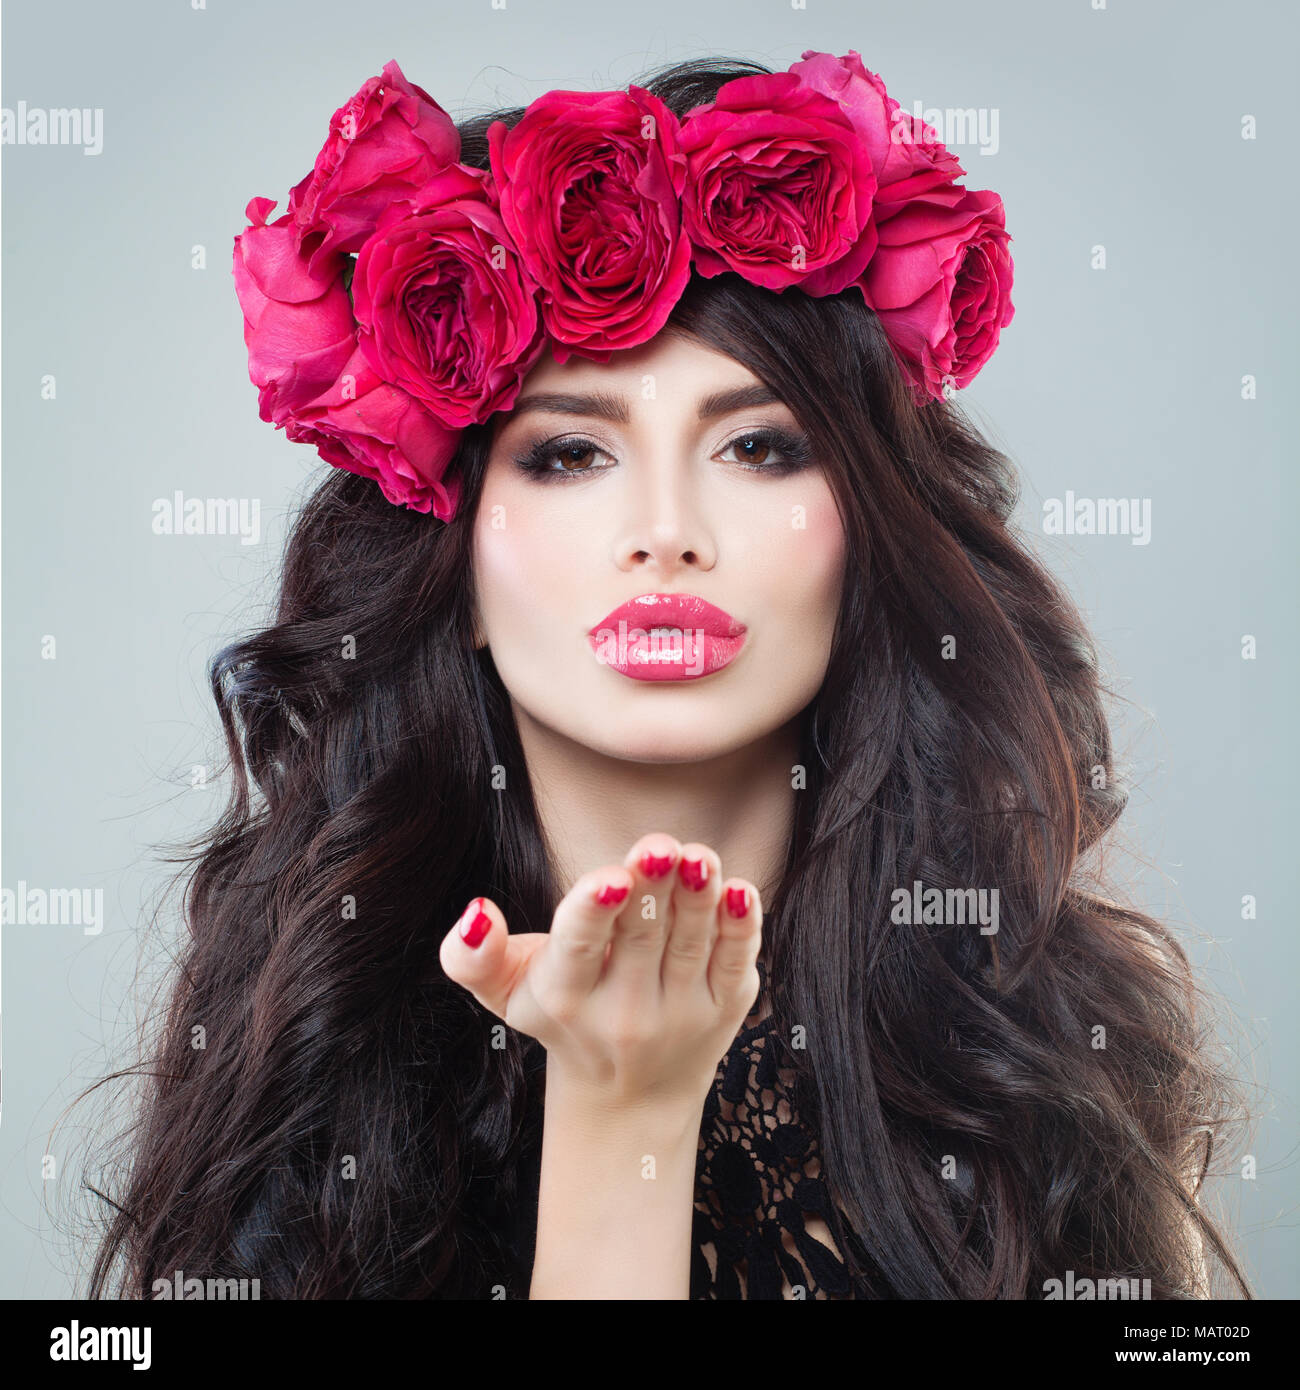 Beautiful Brunette Model Blowing a Kiss. Valentines Day Concept Stock Photo